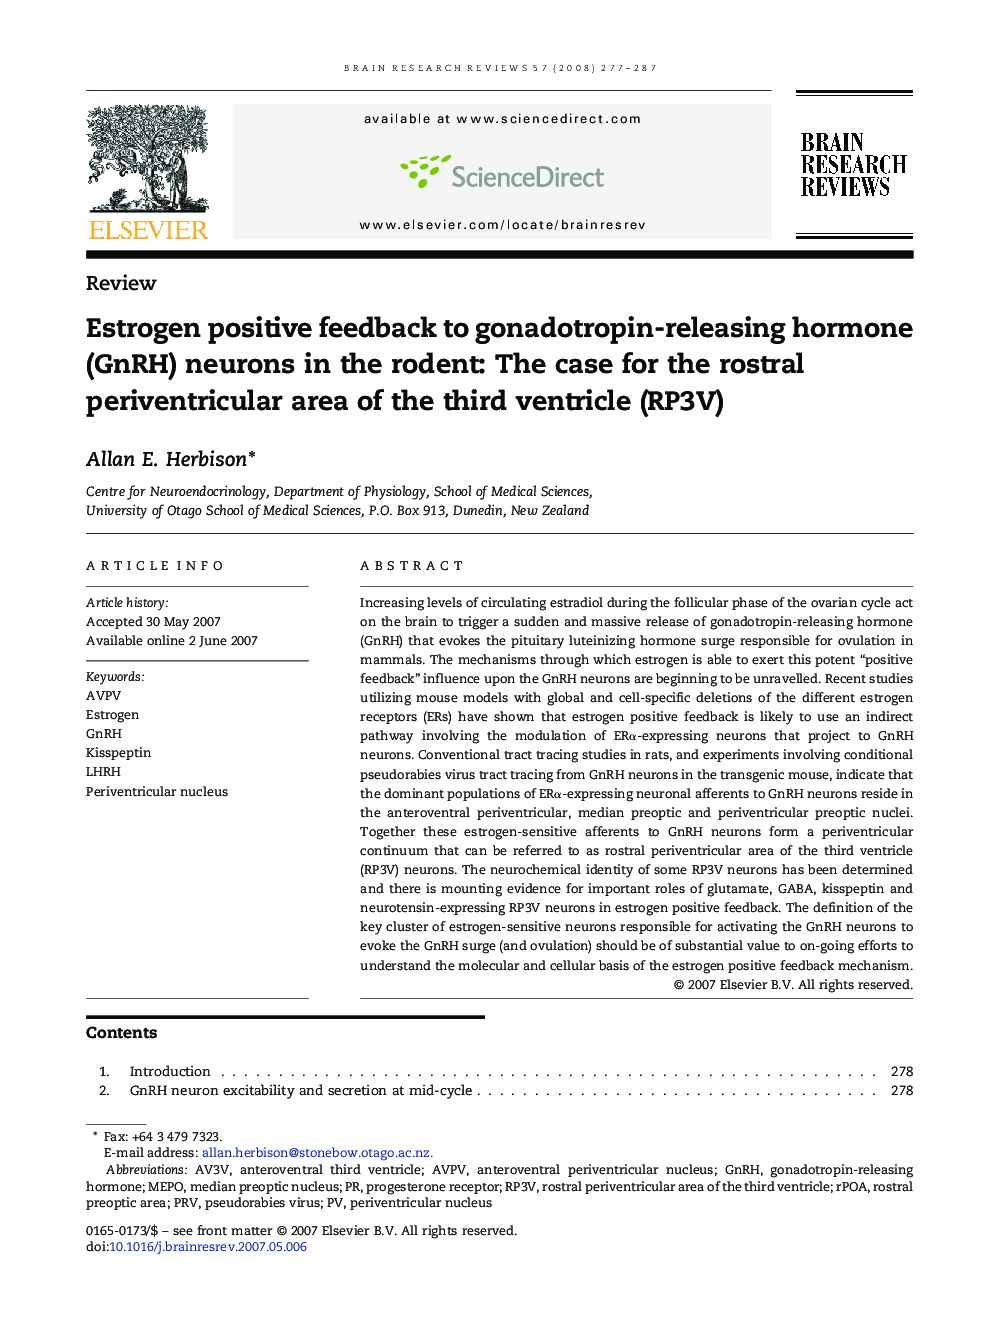 Estrogen positive feedback to gonadotropin-releasing hormone (GnRH) neurons in the rodent: The case for the rostral periventricular area of the third ventricle (RP3V)